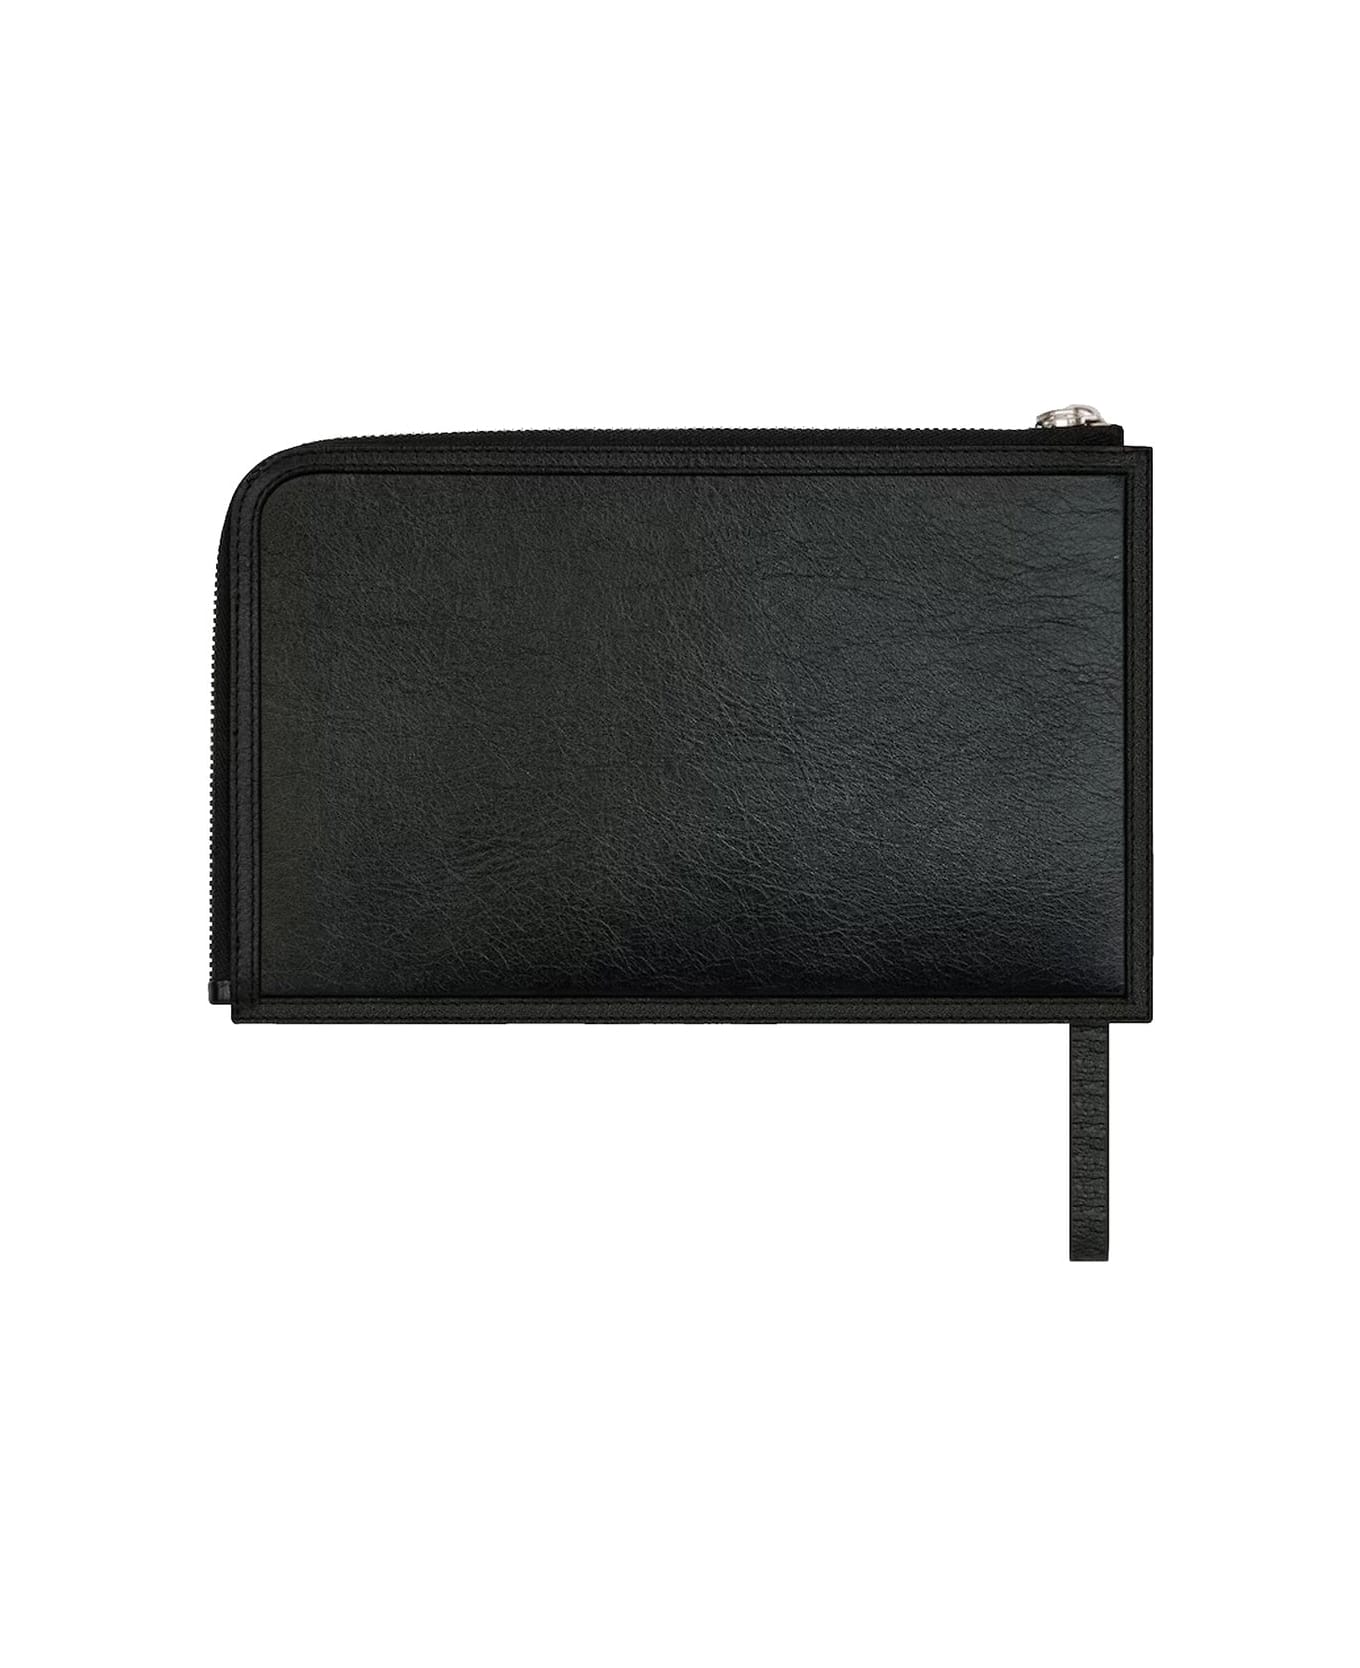 Givenchy Voyou Pouch Bag - Black クラッチバッグ